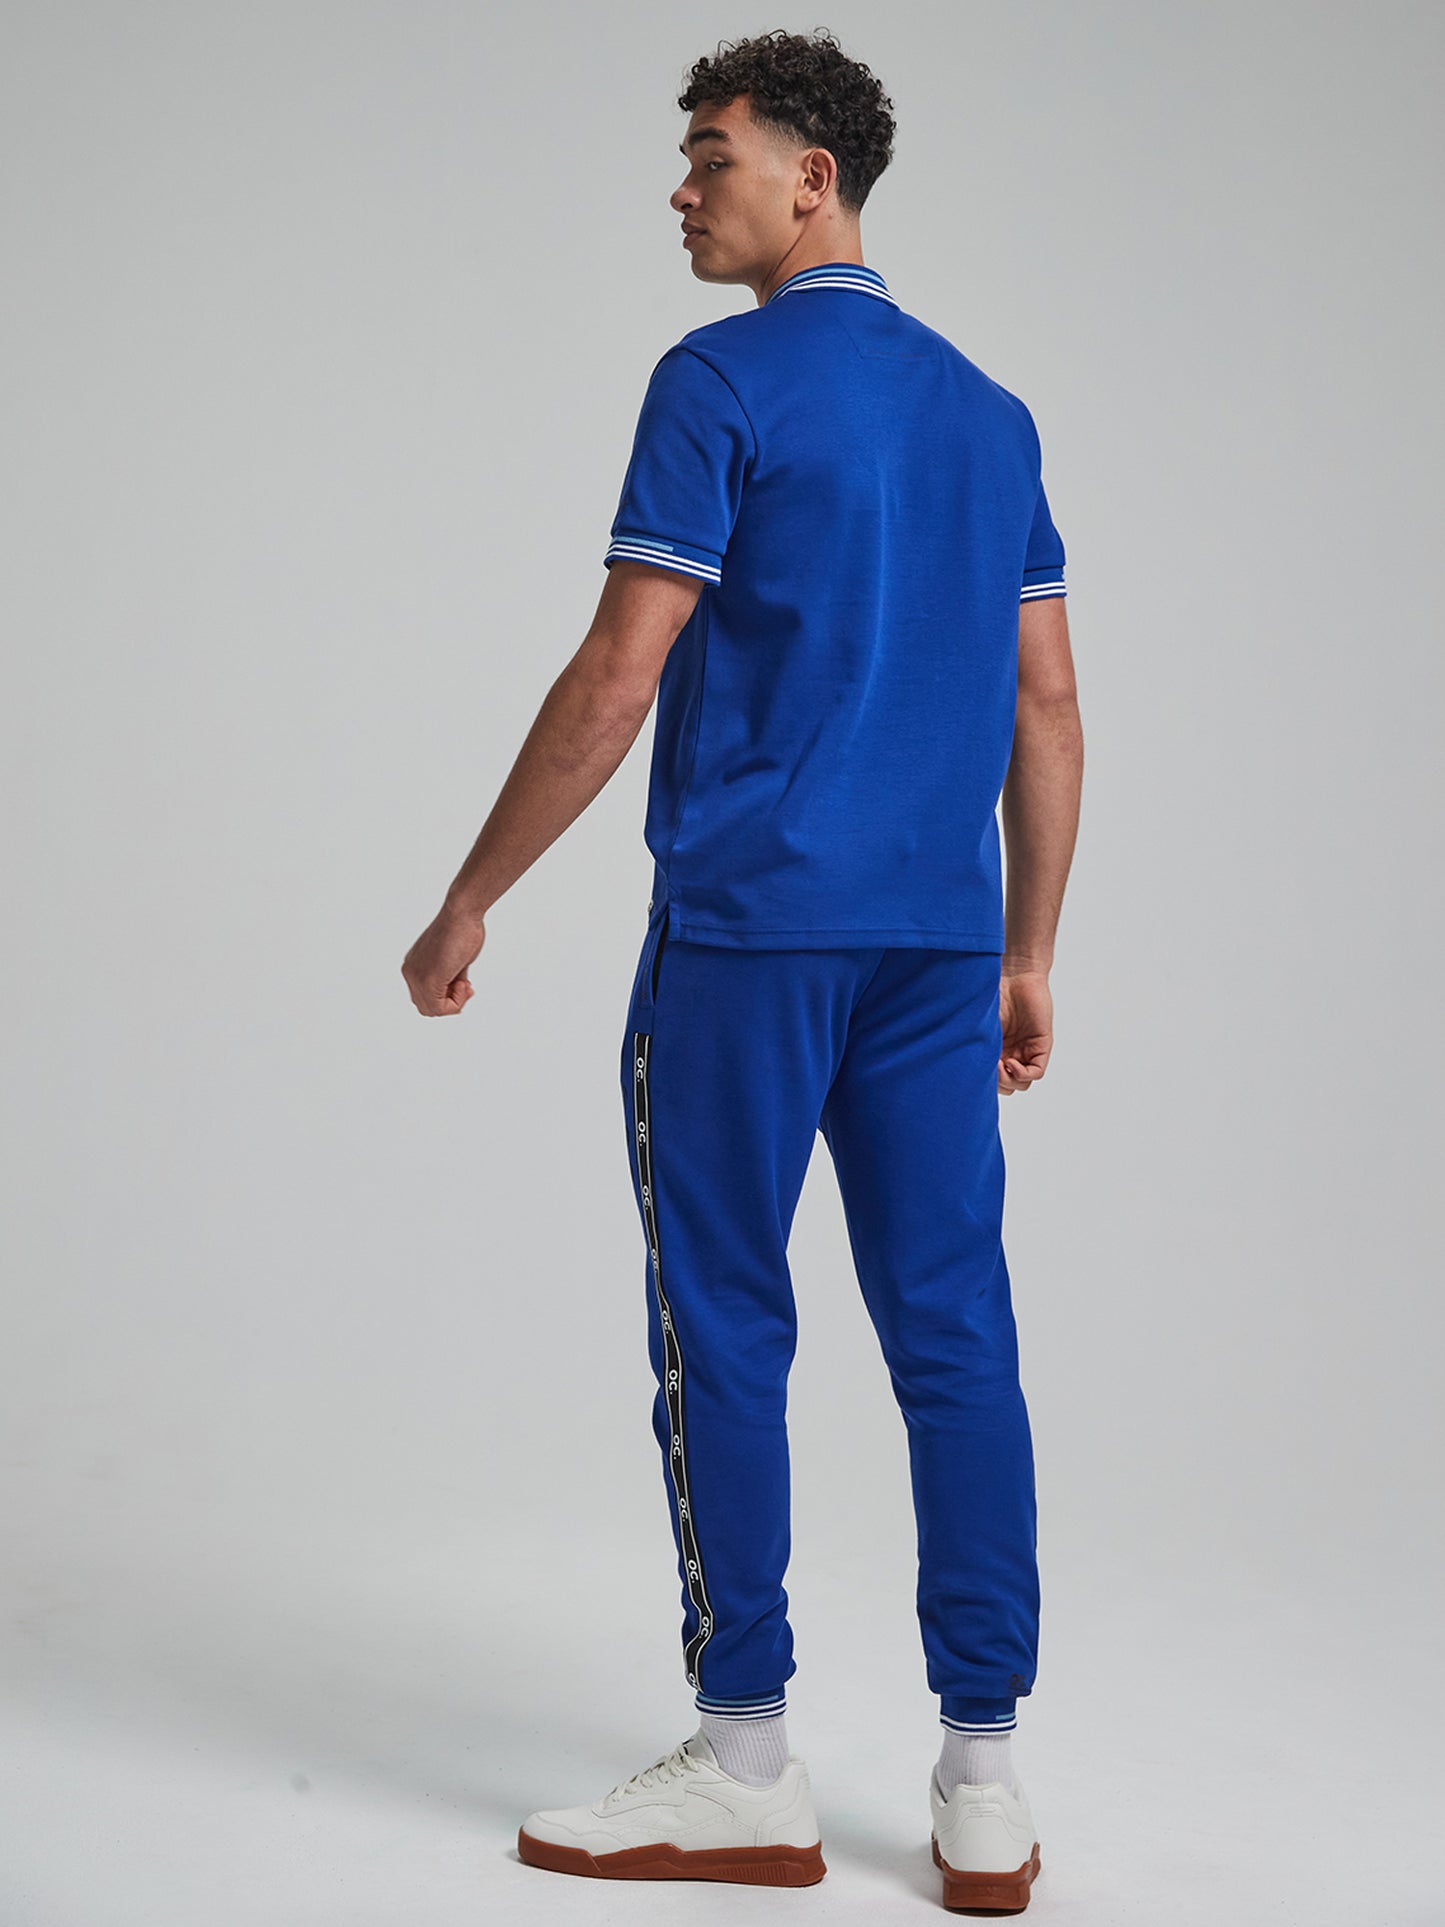 Track Joggers - Olympic Blue